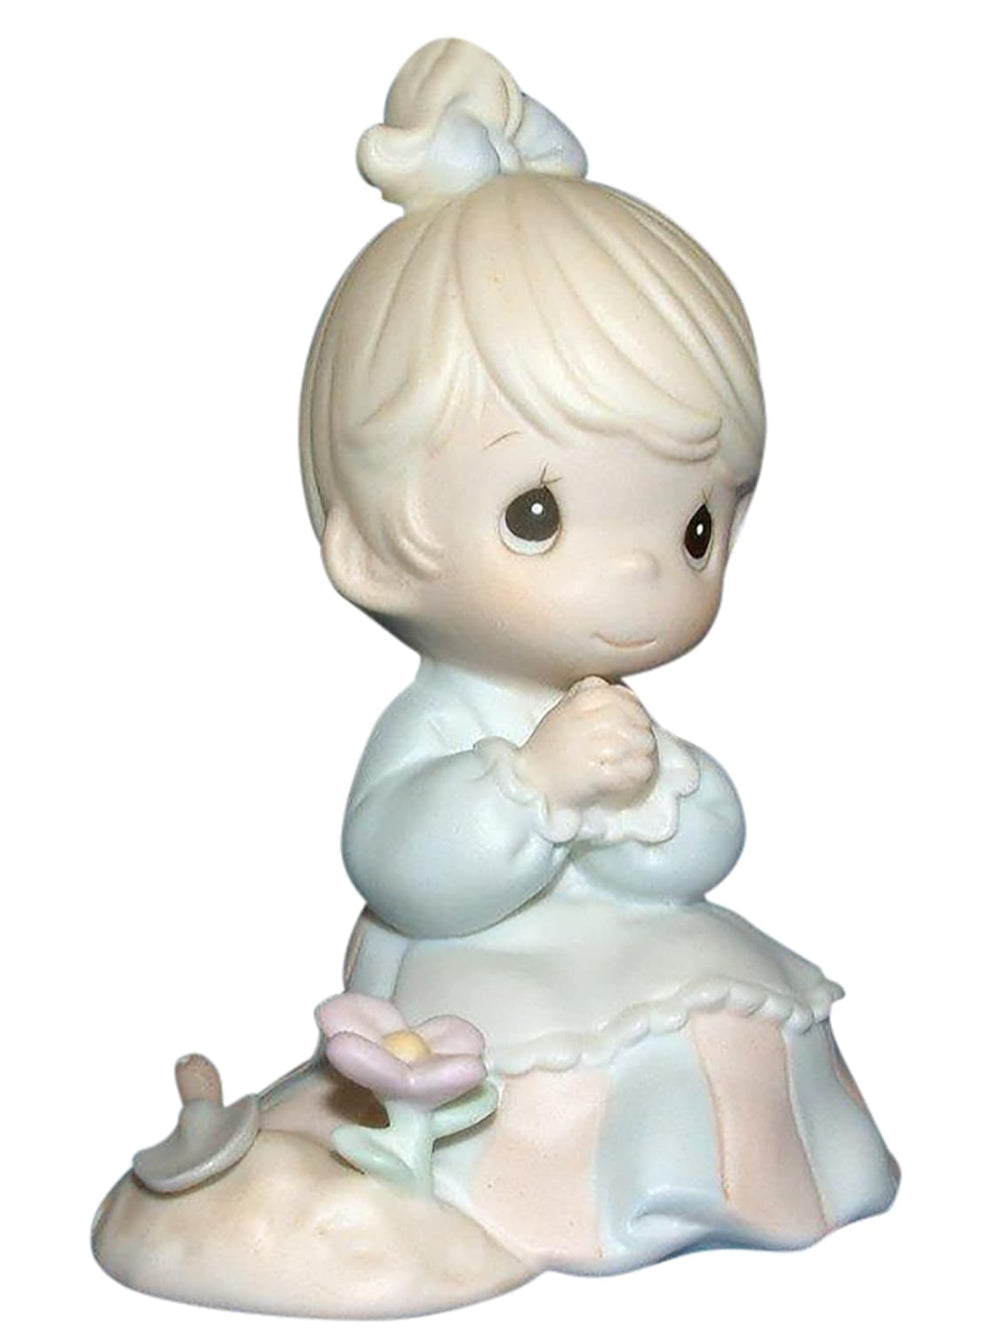 Sowing The Seeds Of Love - Precious Moments Figurine PM922